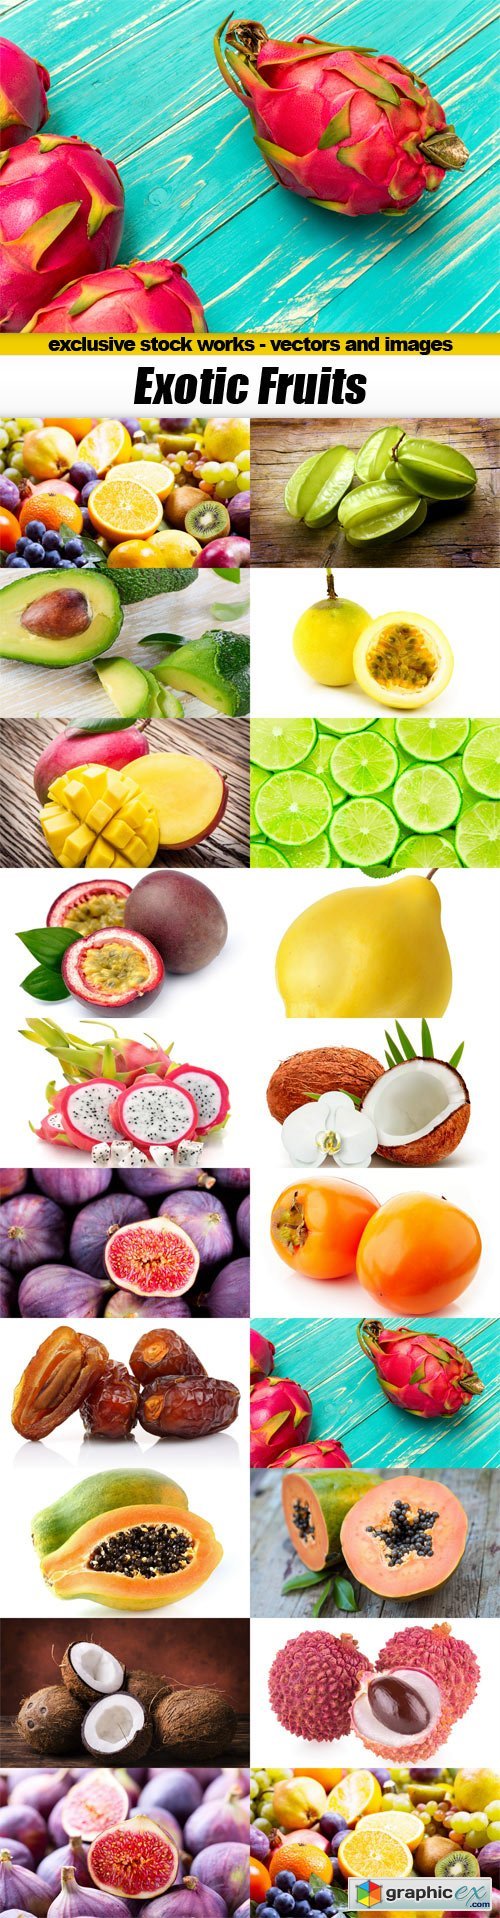 Exotic Fruits - 20x JPEGs